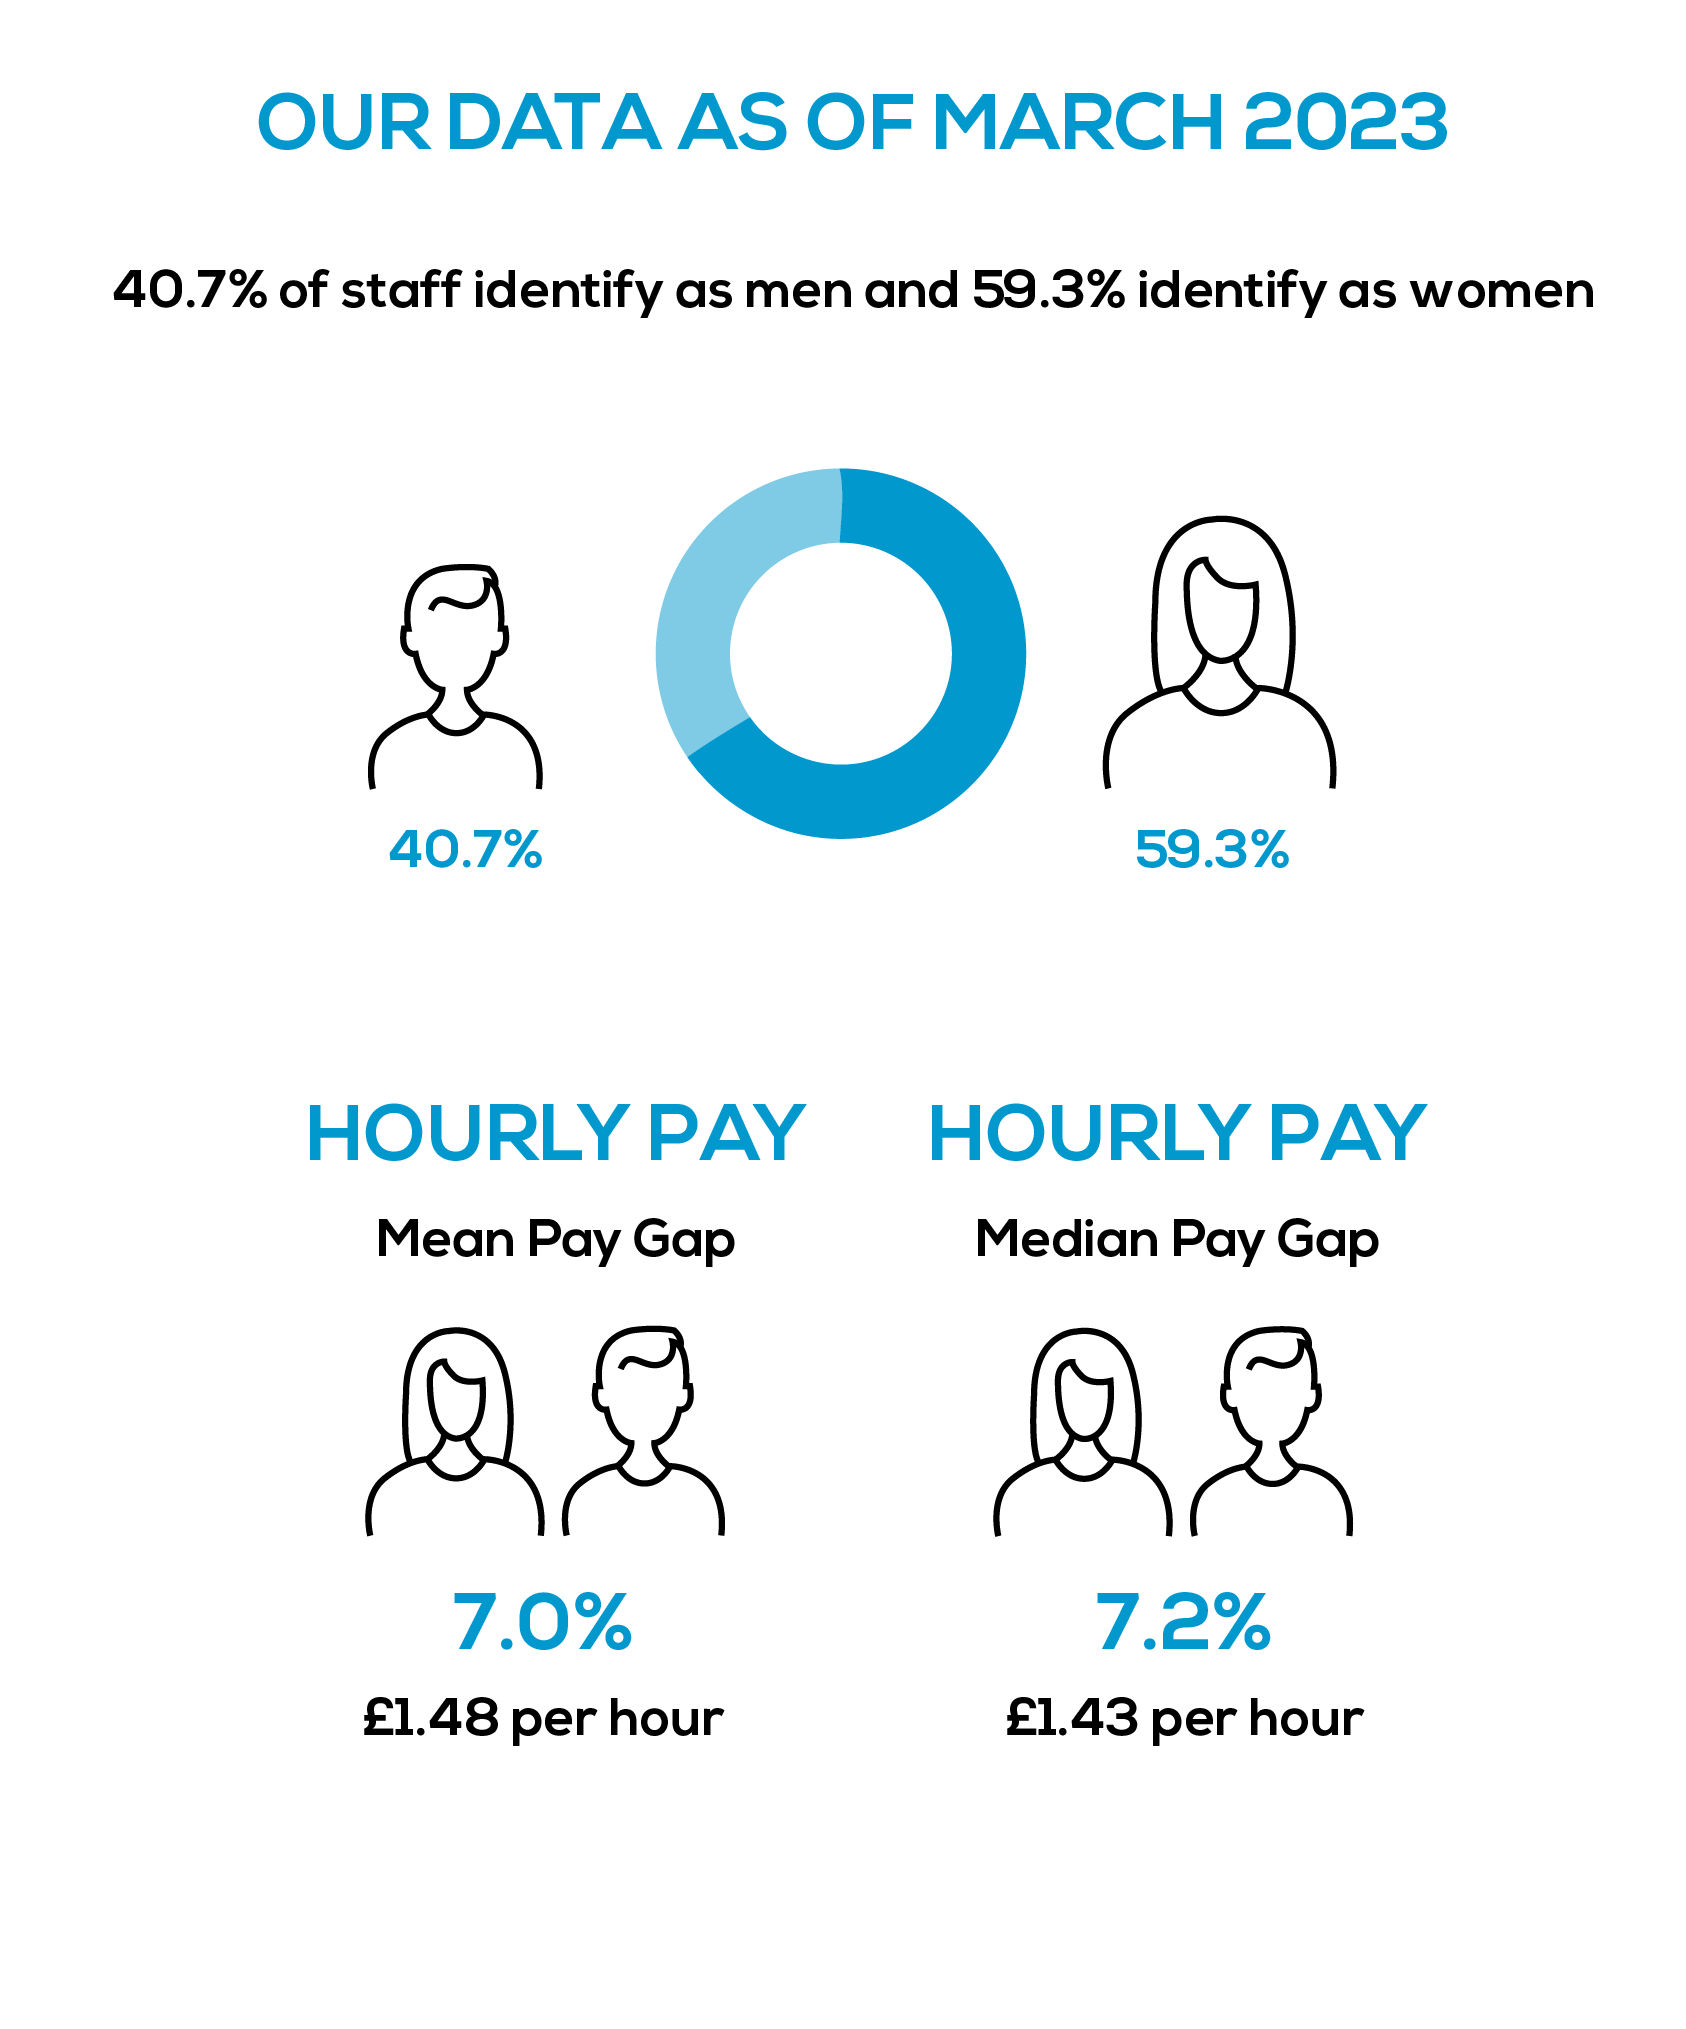 Data as of March 2023: 59.3% identified as women, 40.7% as men; Mean pay gap- 7% per hour; Mean gender pay gap £1.48 per hour; Median Pay gap- 7.2% per hour; Median gender pay gap £1.43 per hour.